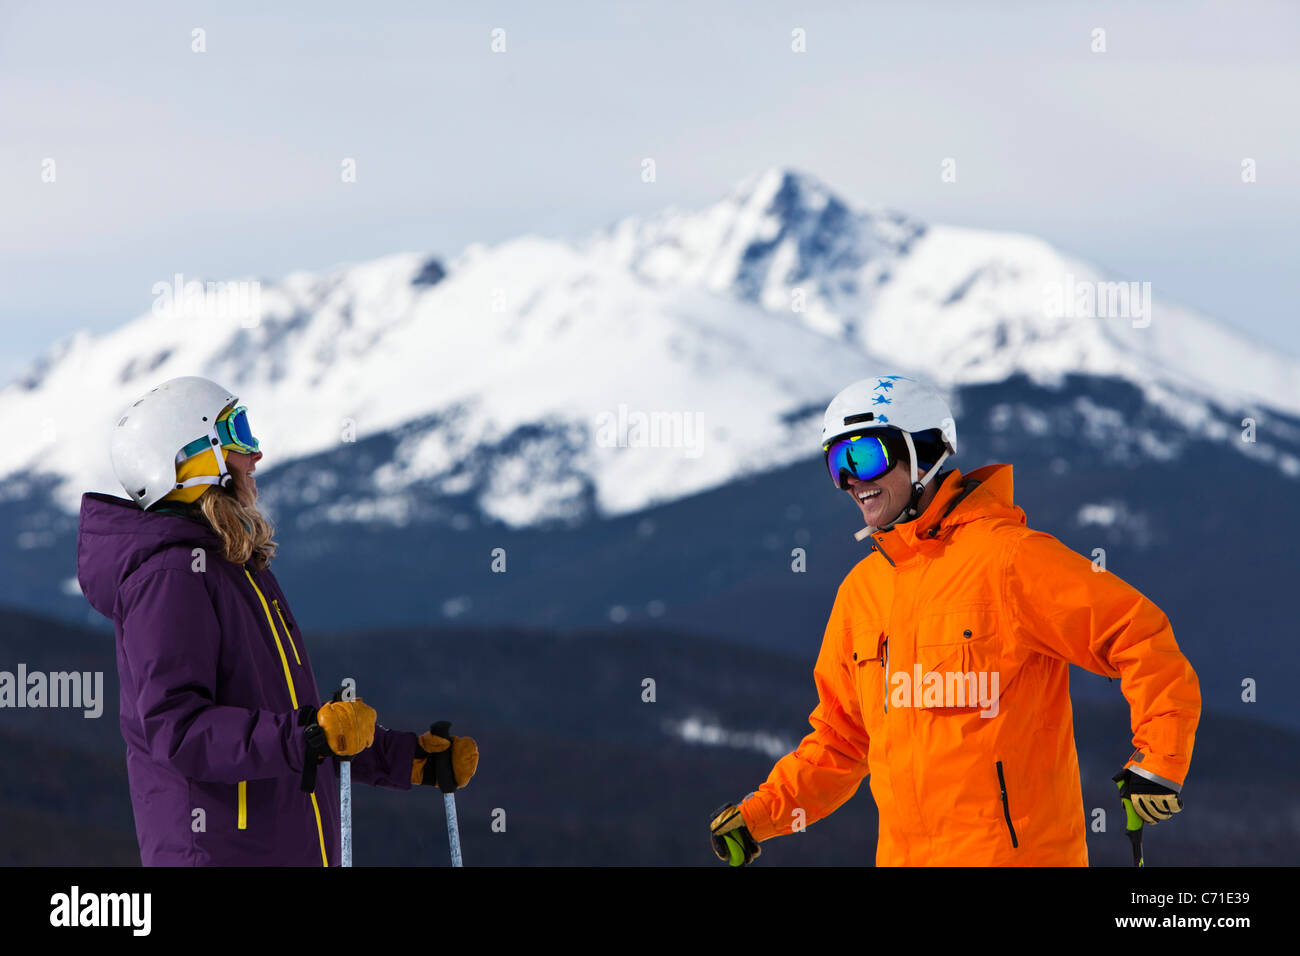 A skiing couple laugh as they talk on a sunny day at Vail, Colorado. Stock Photo